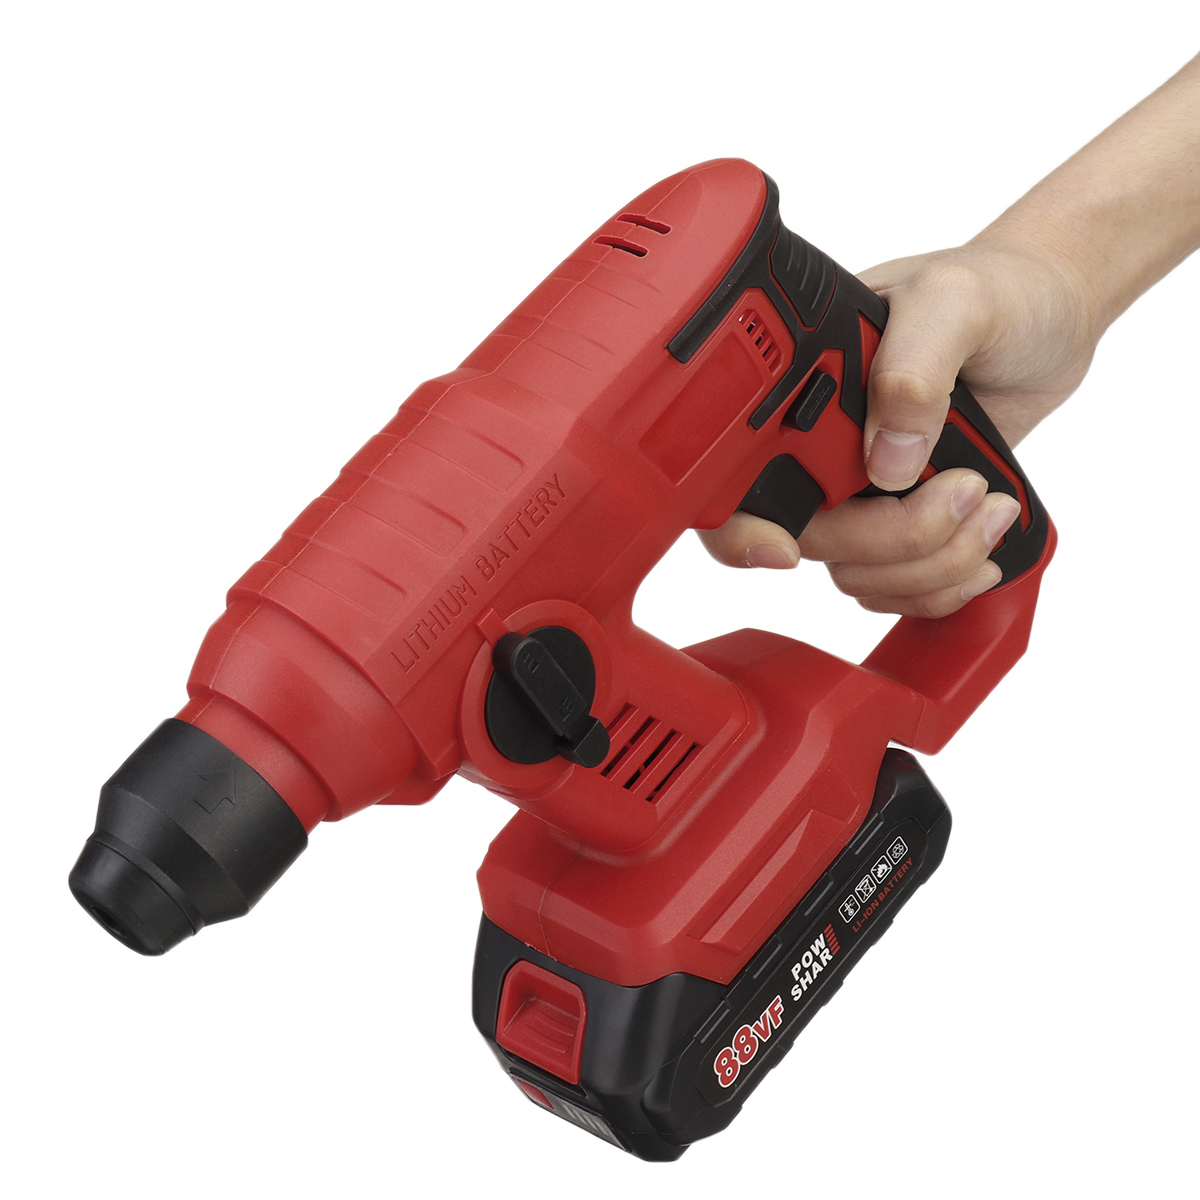 88VF-2000W-Rechargeable-Electric-Hammer-Lithium-Impact-Electric-Hammer-Impact-Drill-With-6mm-Drill-B-1896291-5